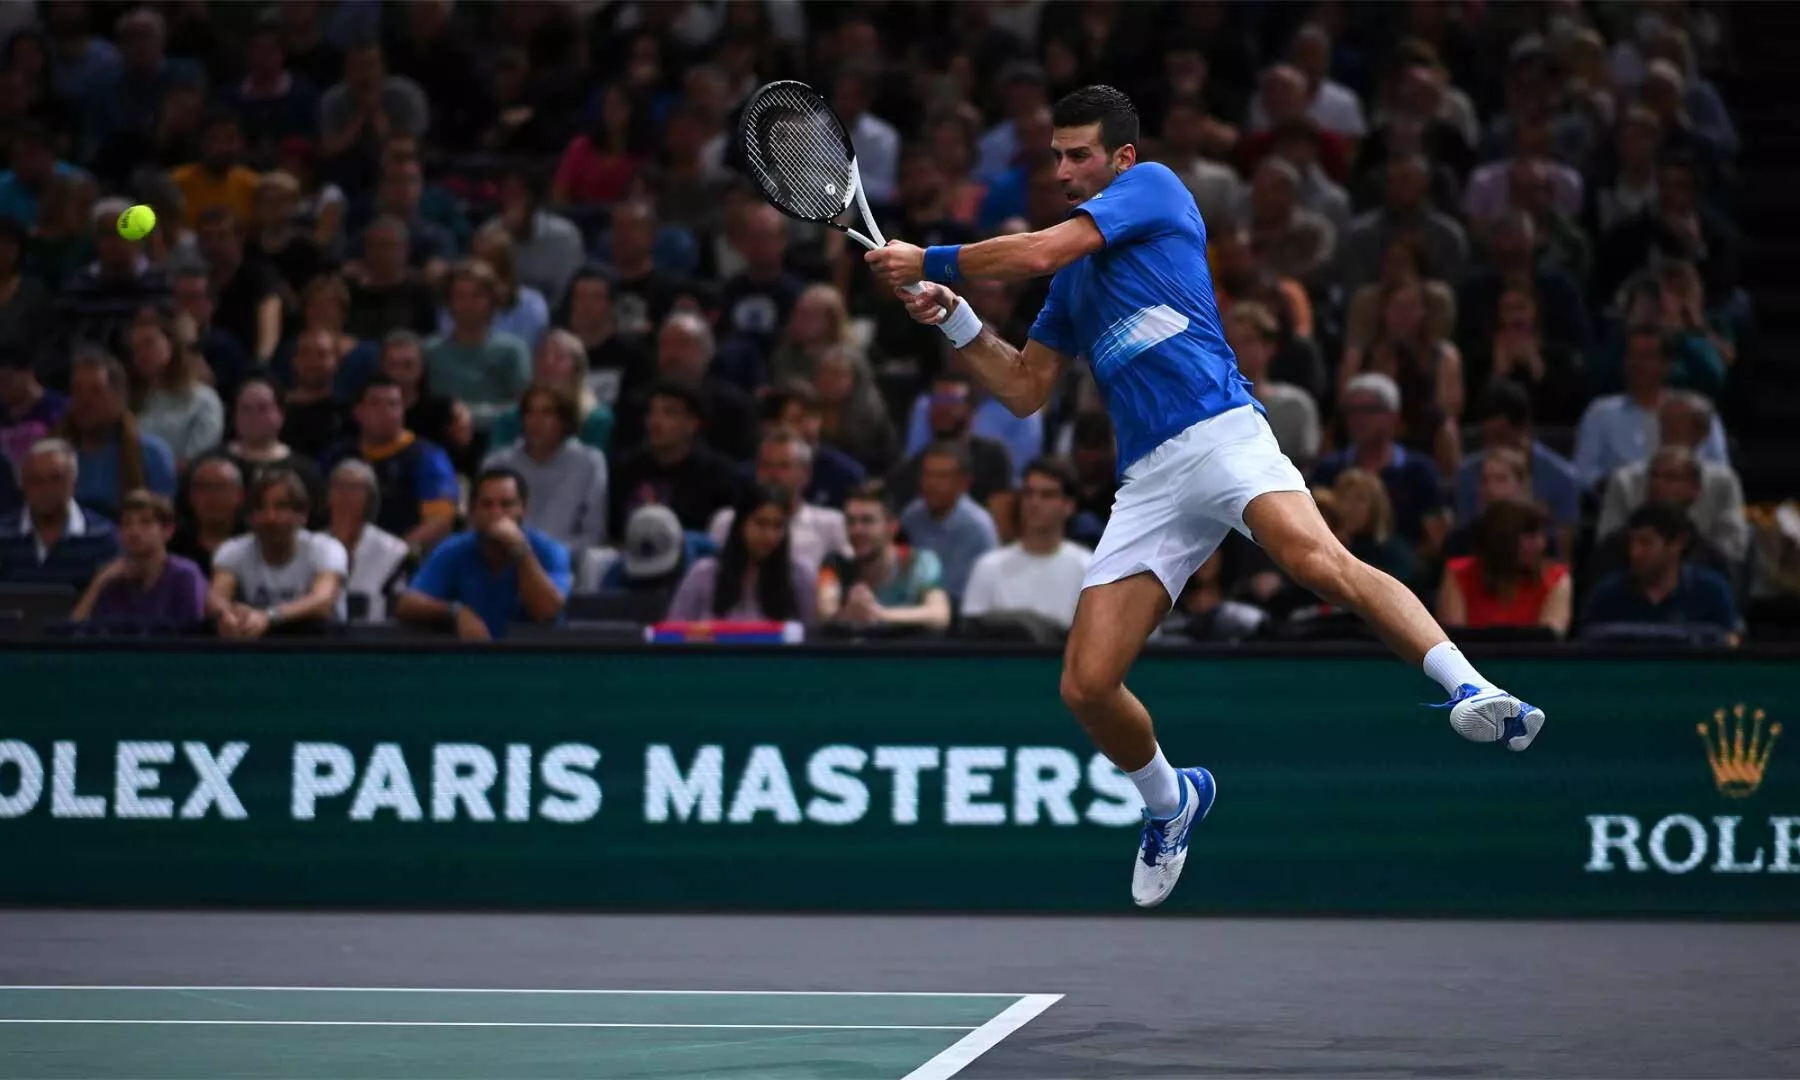 Where and how to watch Rolex Paris Masters 2023 live in India?